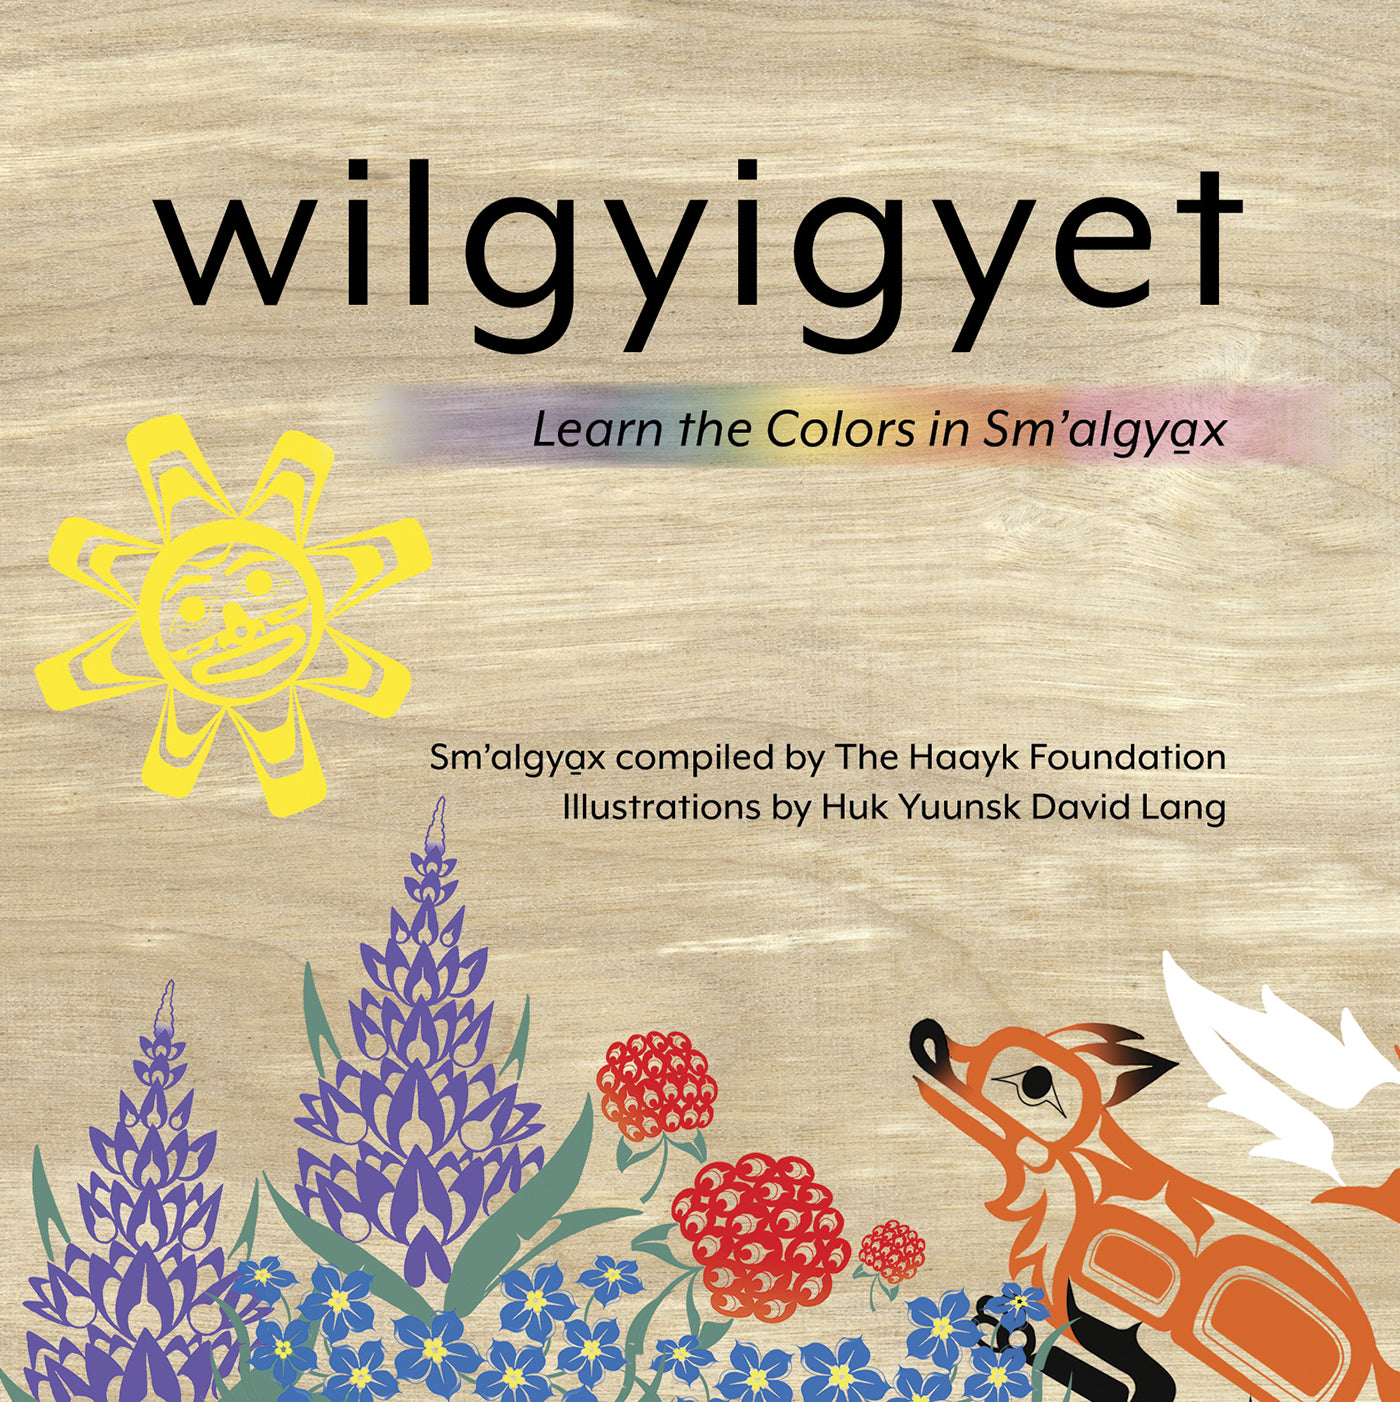 Book, BRR - “Wilgyigyet: Learn the Colors in Sm'algyax"